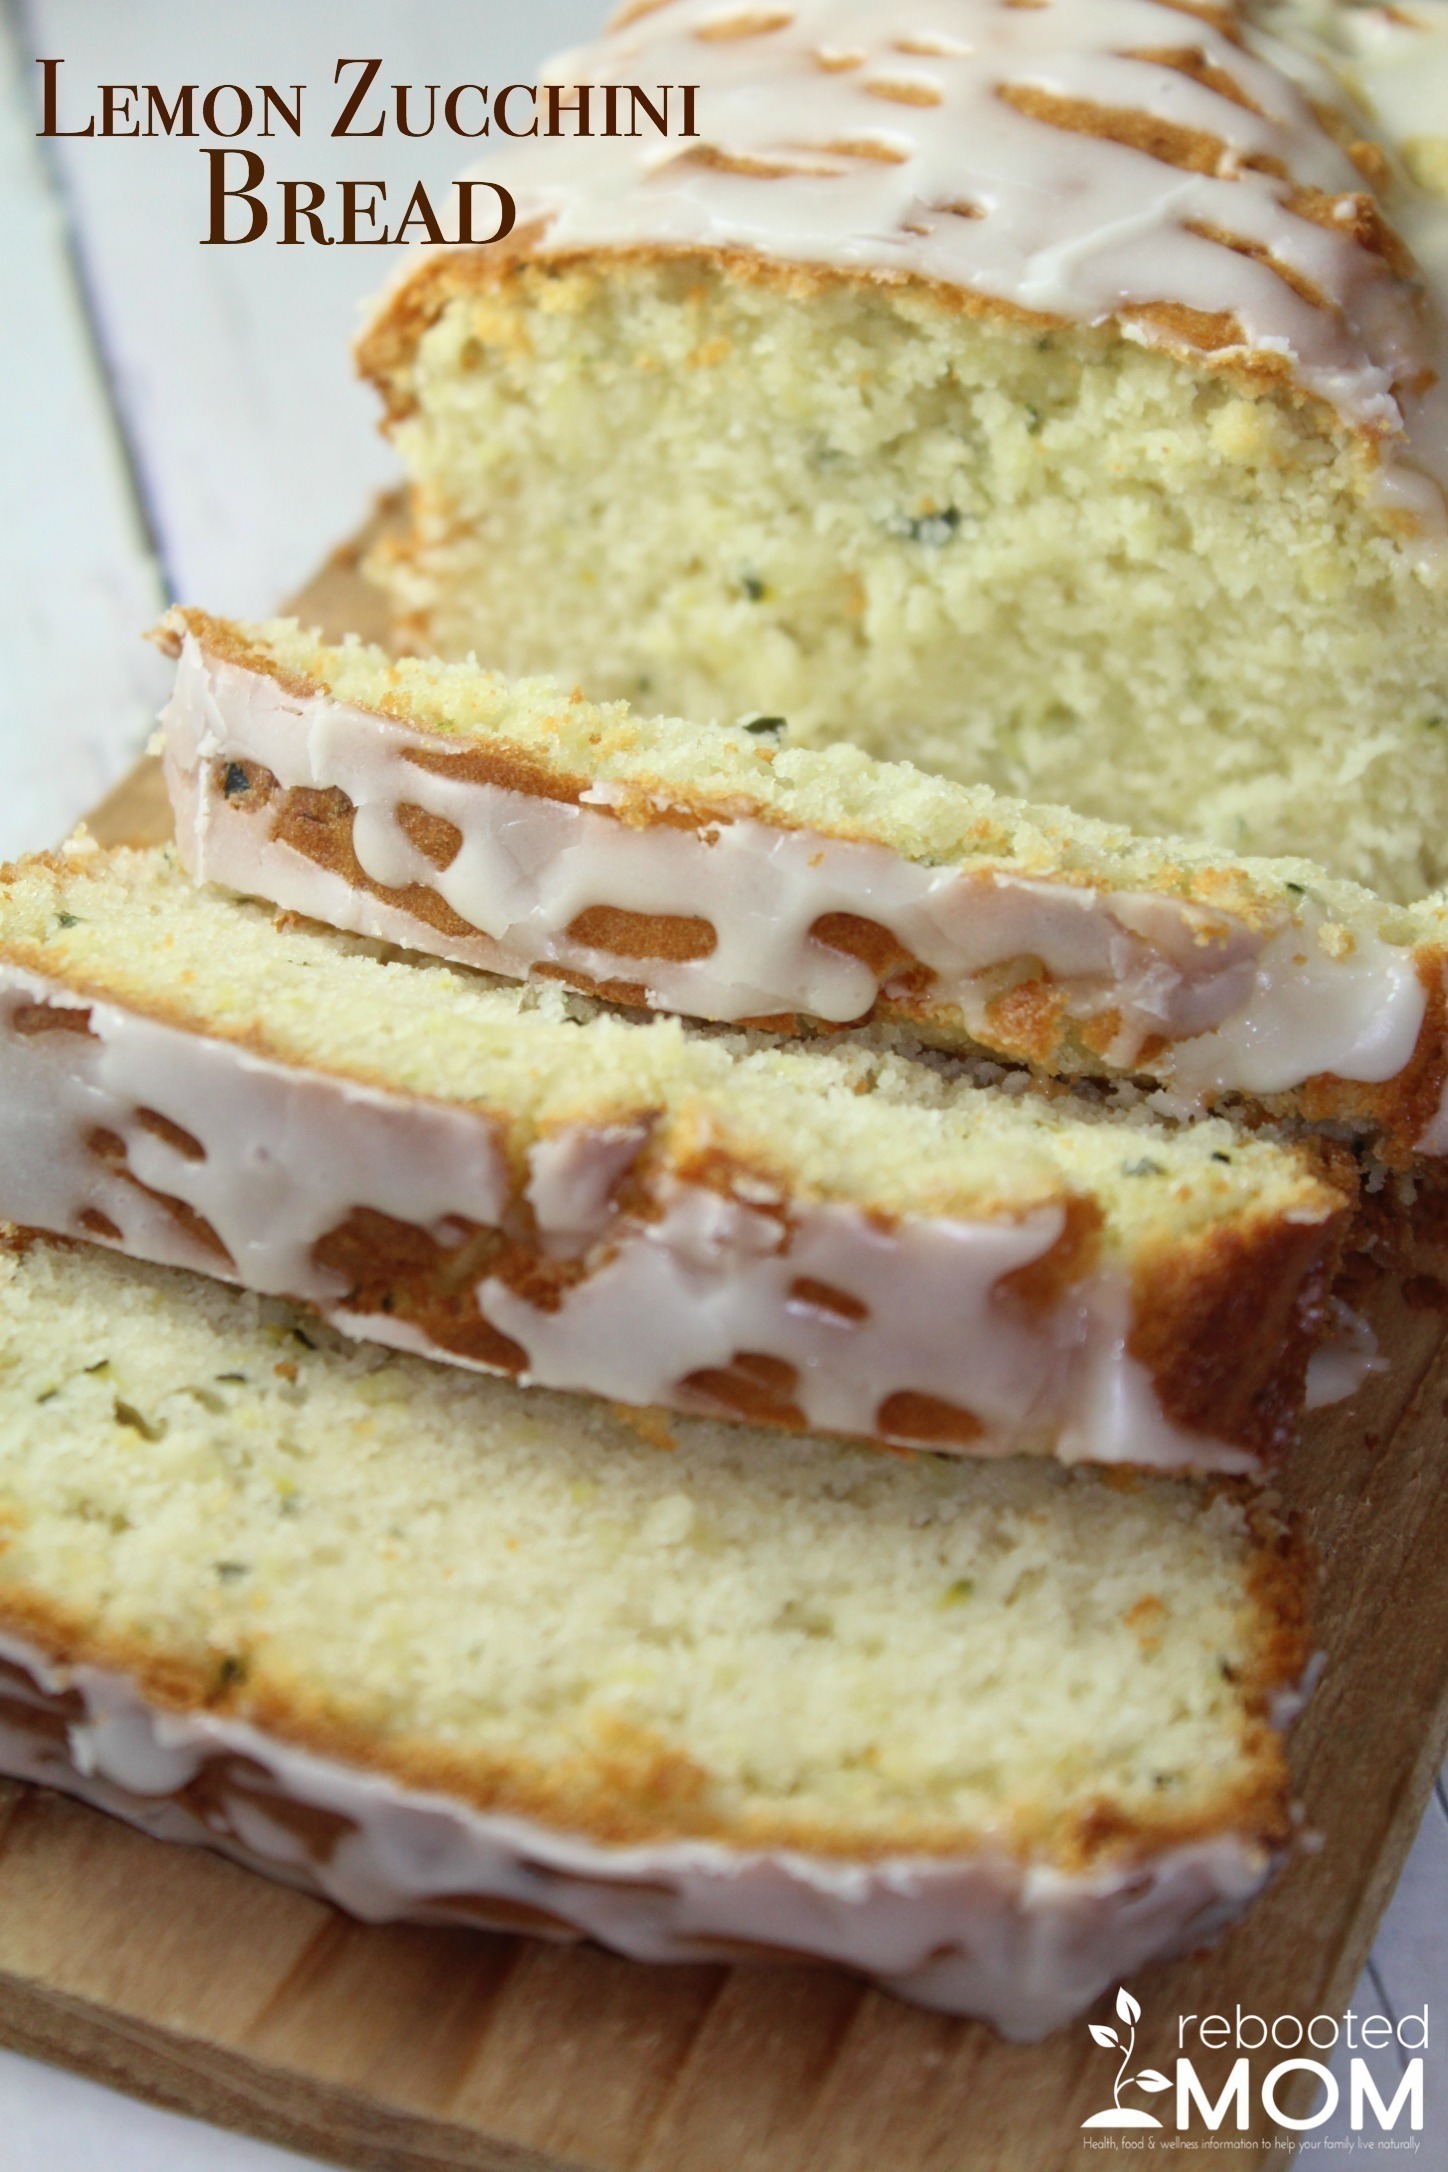 This Lemon Zucchini Bread with Essential Oils is a wonderful way to enjoy breakfast with a cup of coffee - this savory bread is speckled with zucchini with a light glaze.